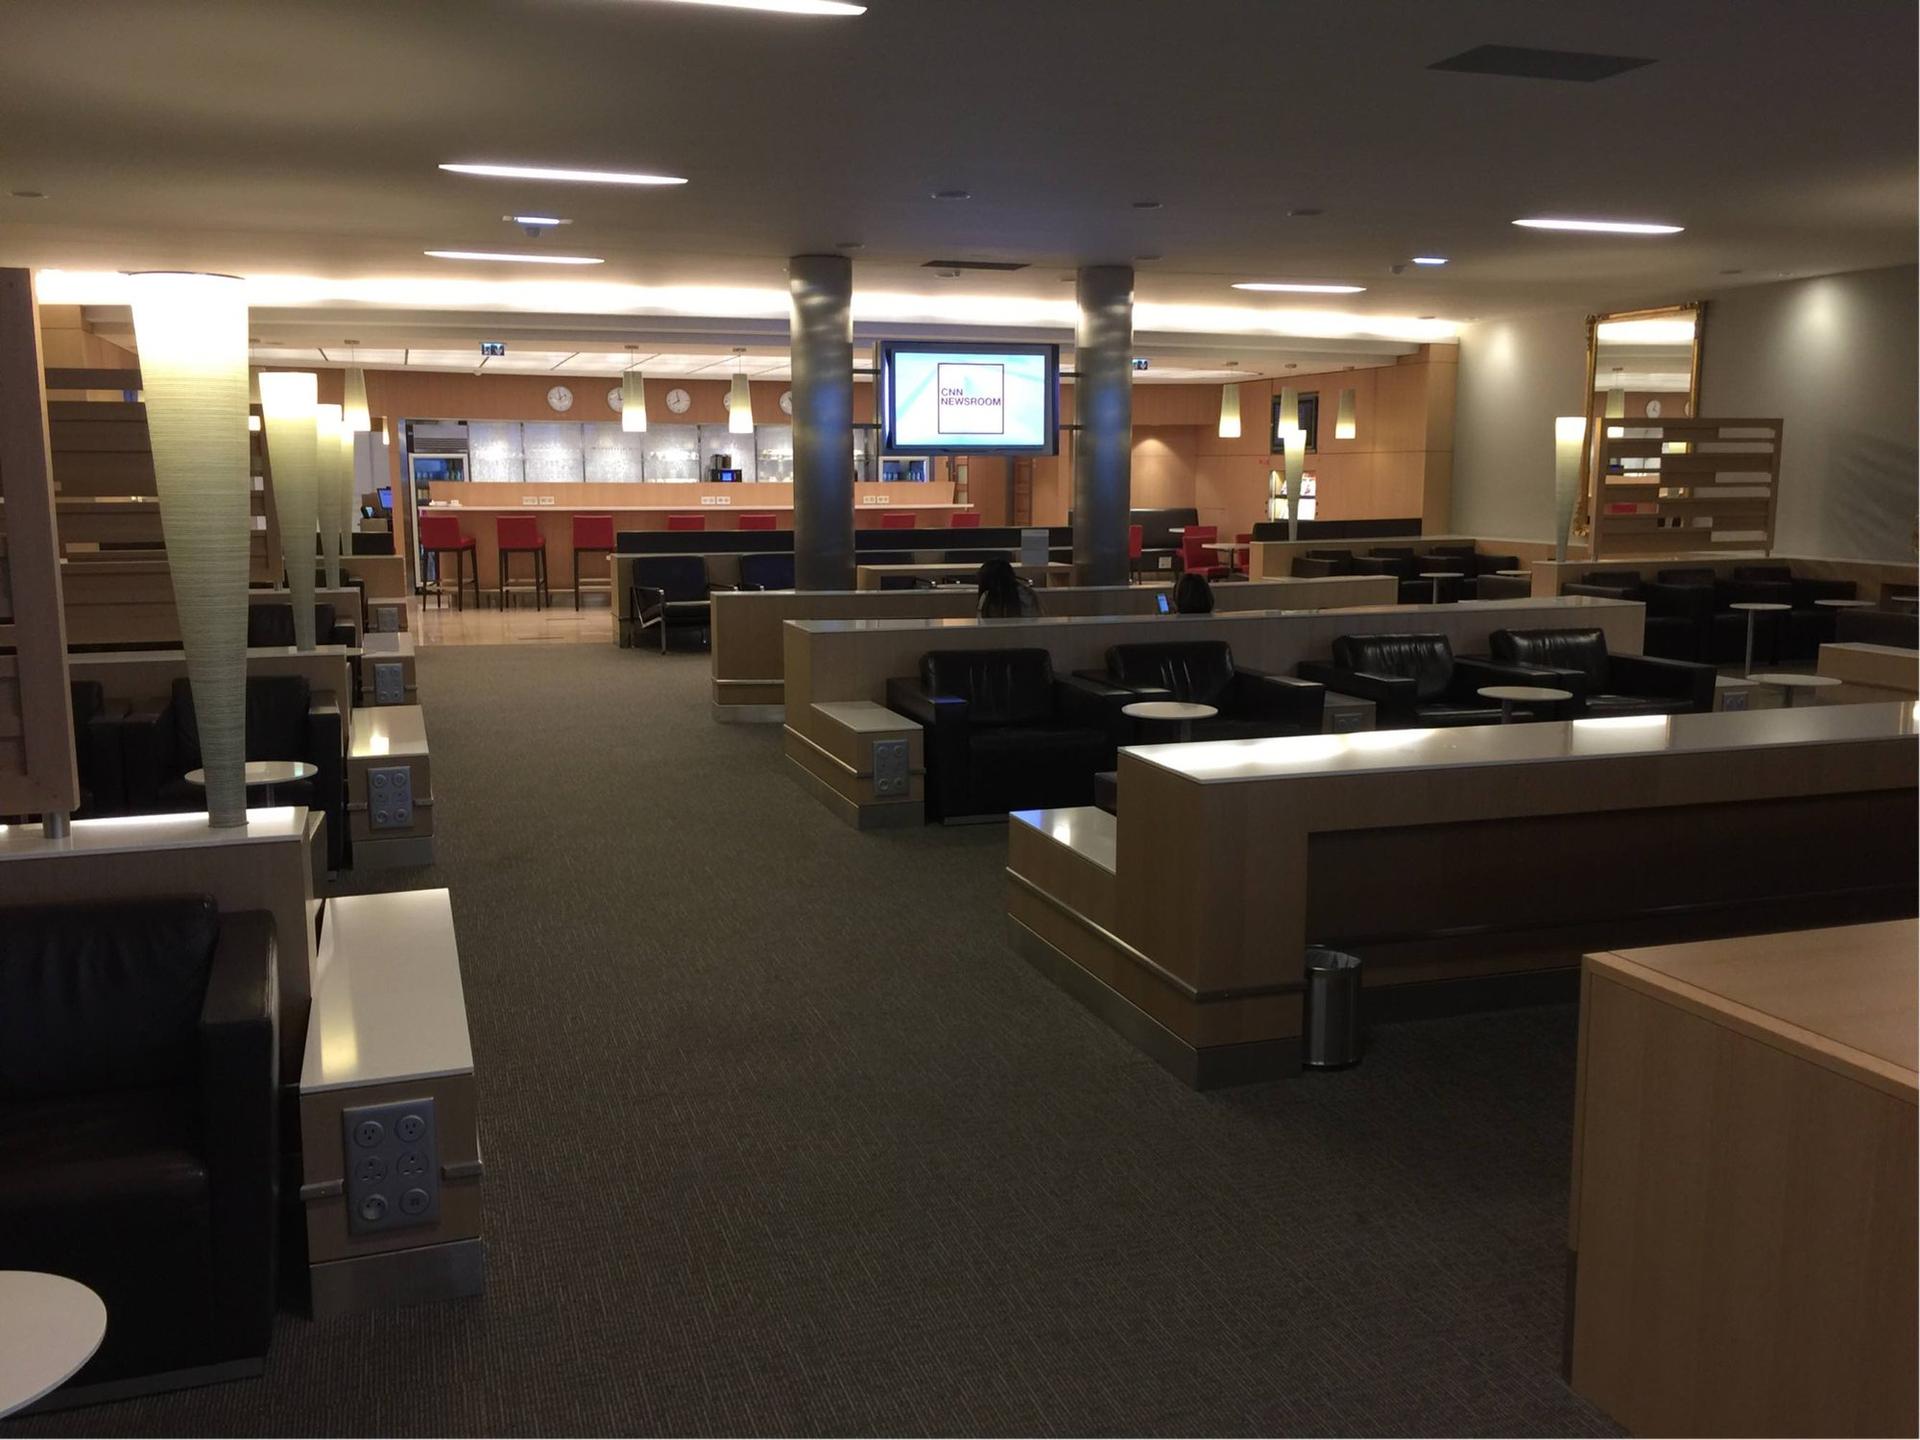 American Airlines Admirals Club  image 15 of 25